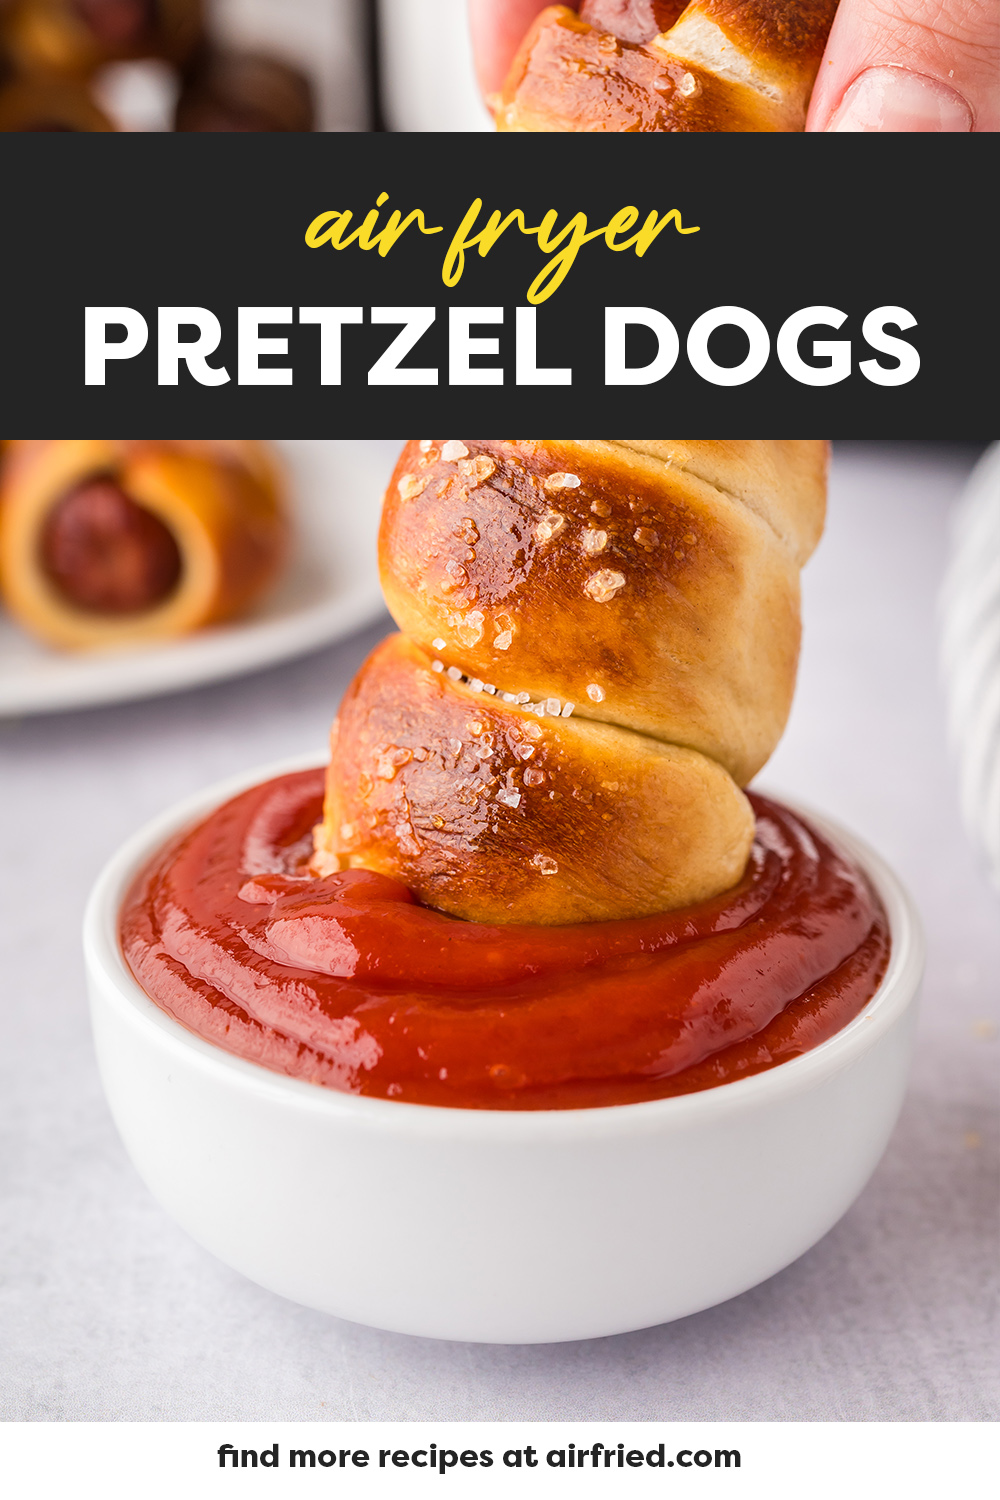 A pretzel dog being dipped into ketchup.